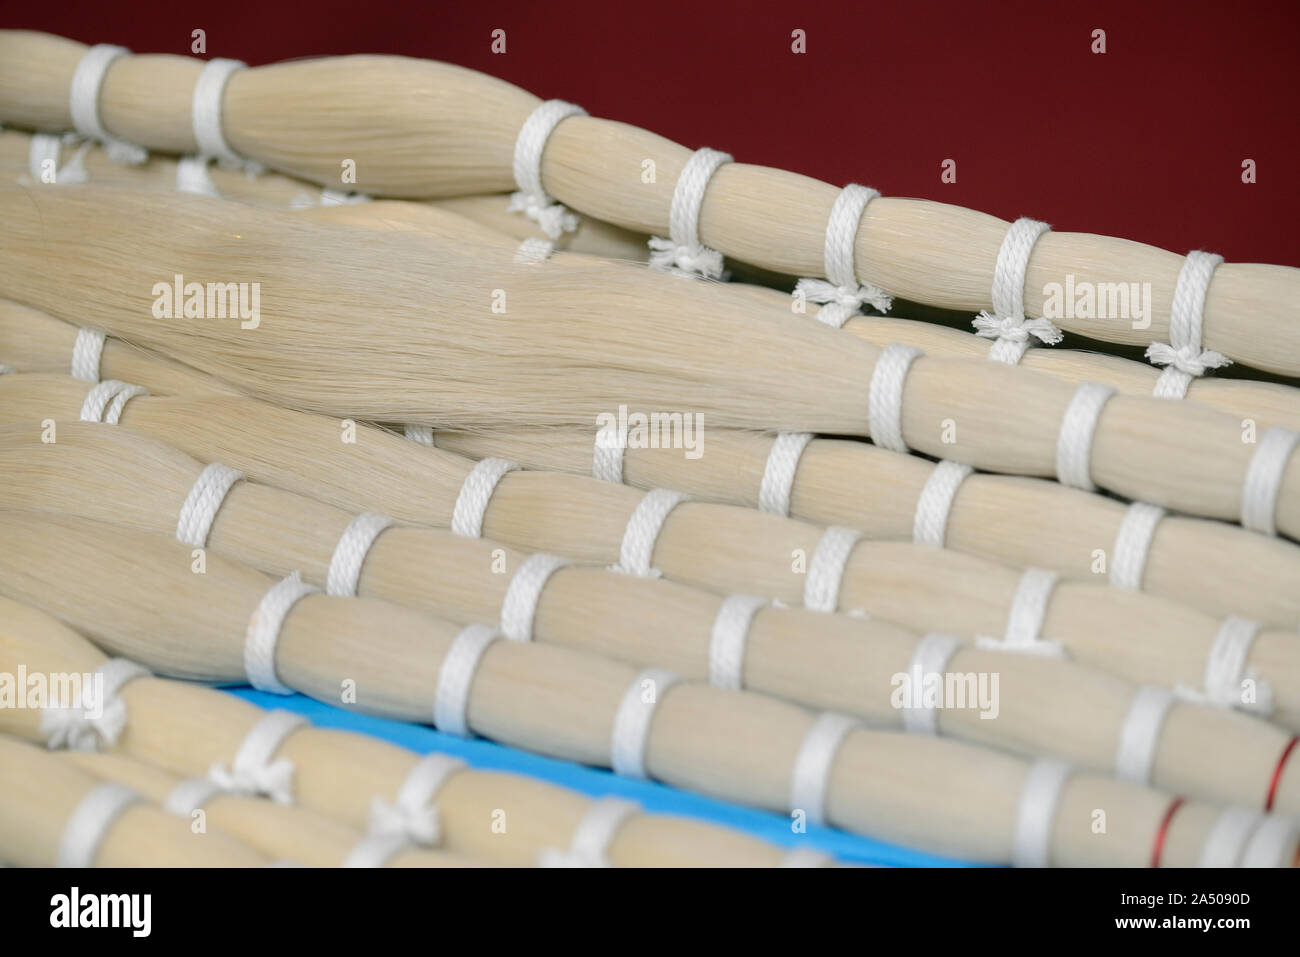 Italy, Lombardy, Cremona, Cremona Musica International Exhibitions and Festival 2019, Horse Hair Bow Stock Photo